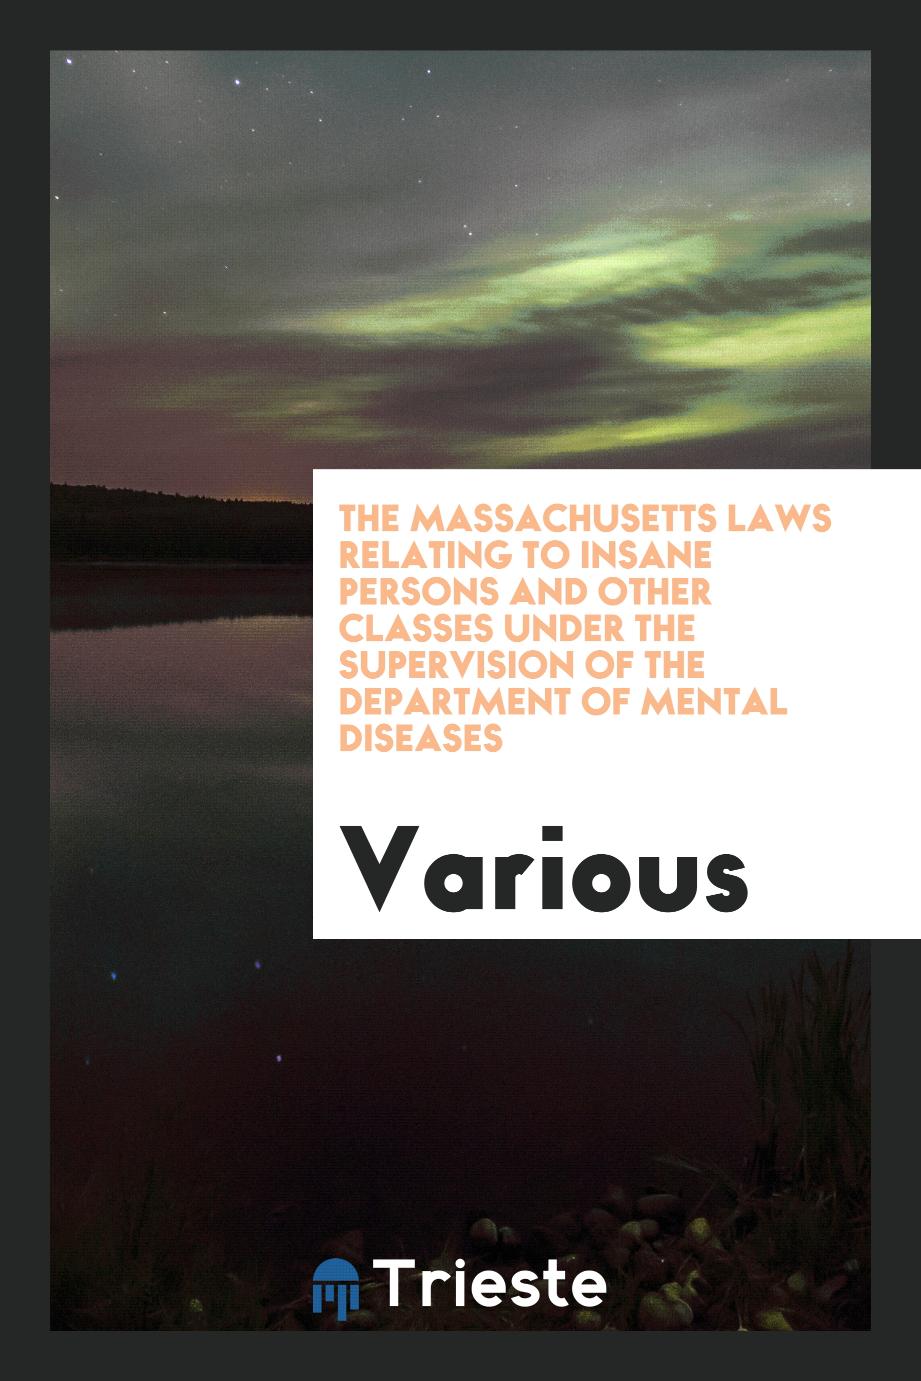 The Massachusetts Laws Relating to Insane Persons and Other Classes Under the supervision of the department of mental diseases